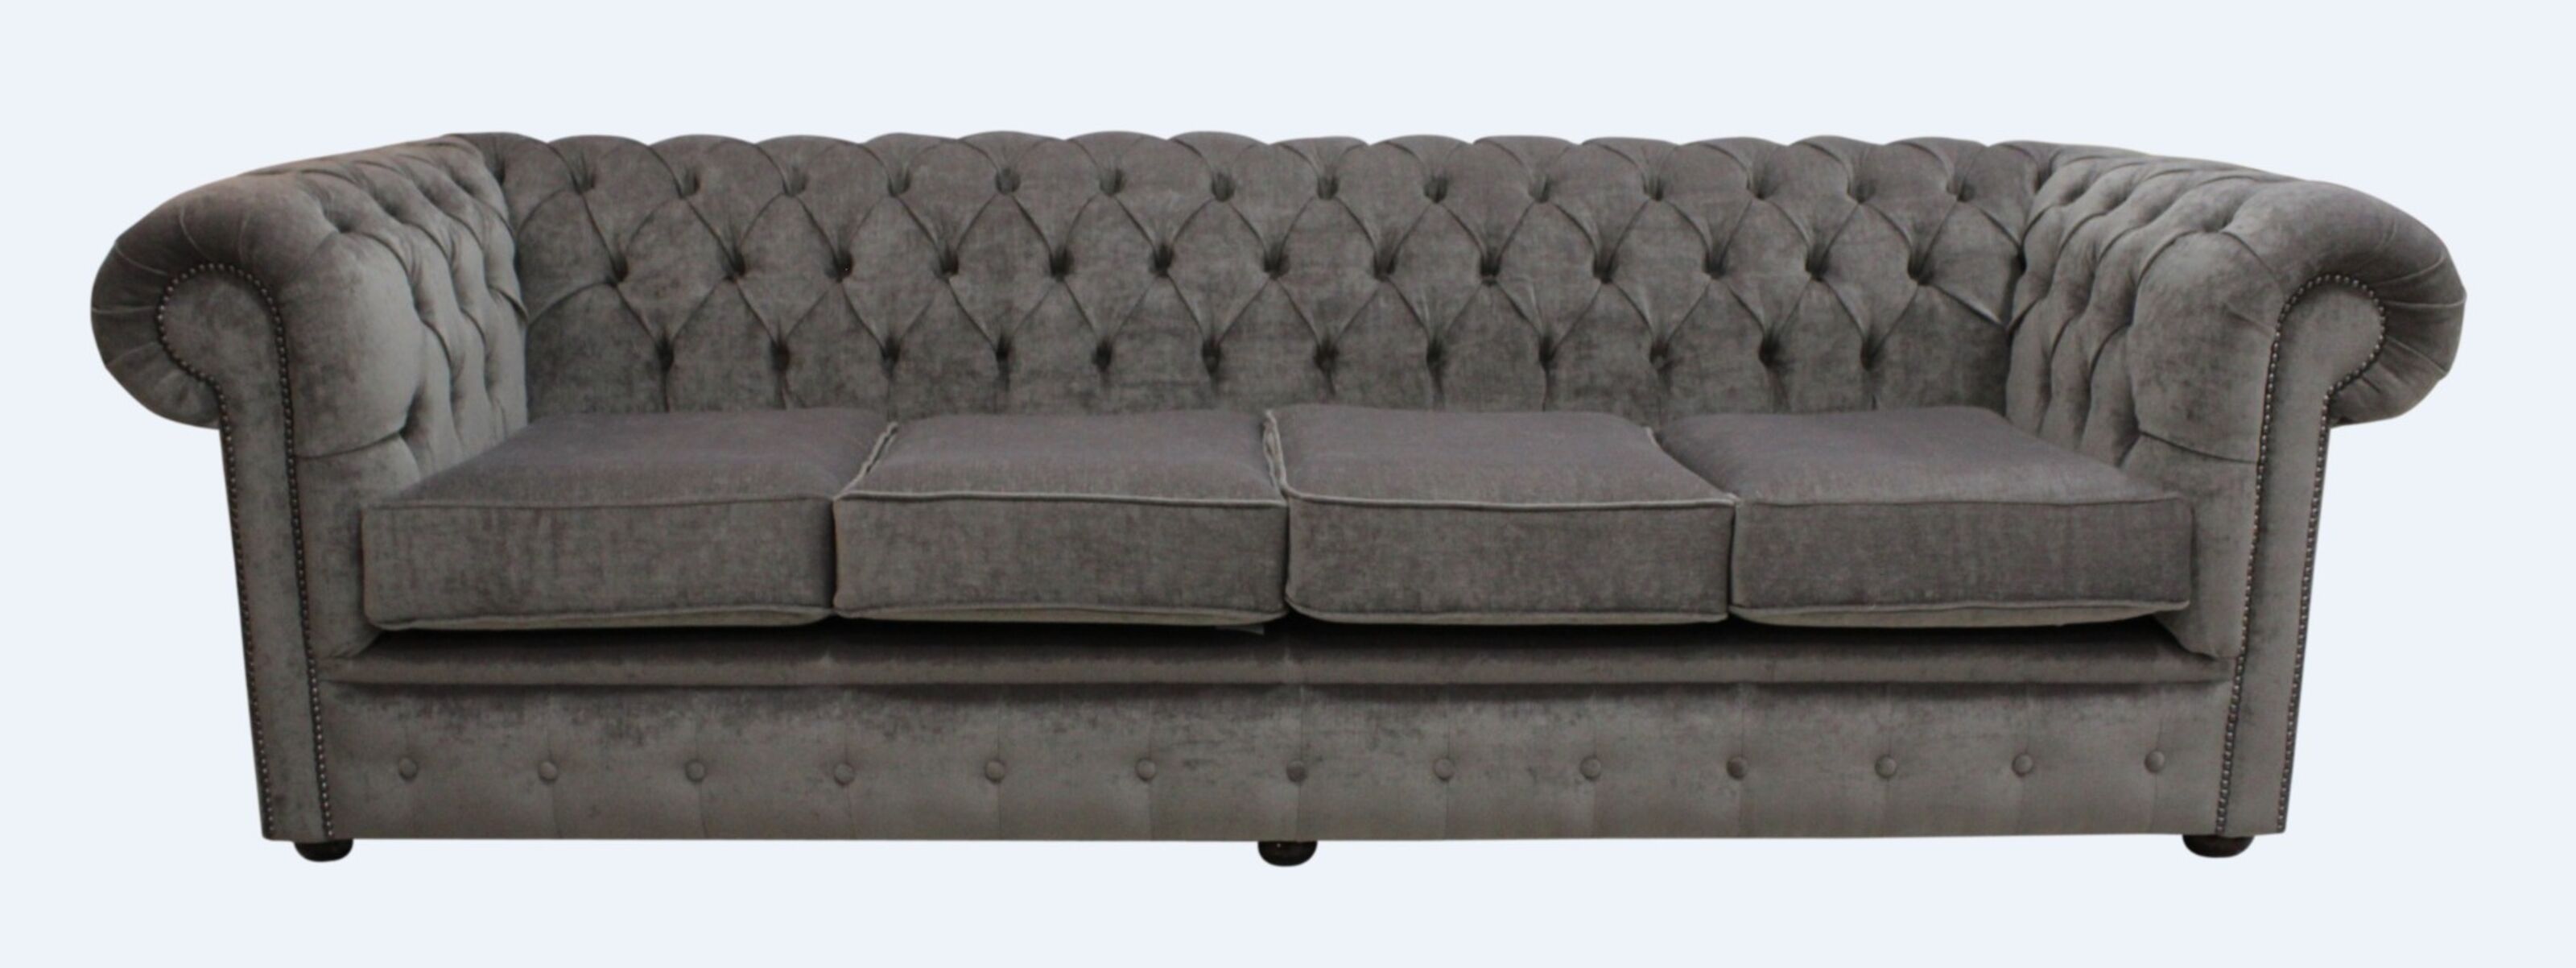 Unwind and Lounge with Chesterfield Manchester at DesignerSofas4u  %Post Title